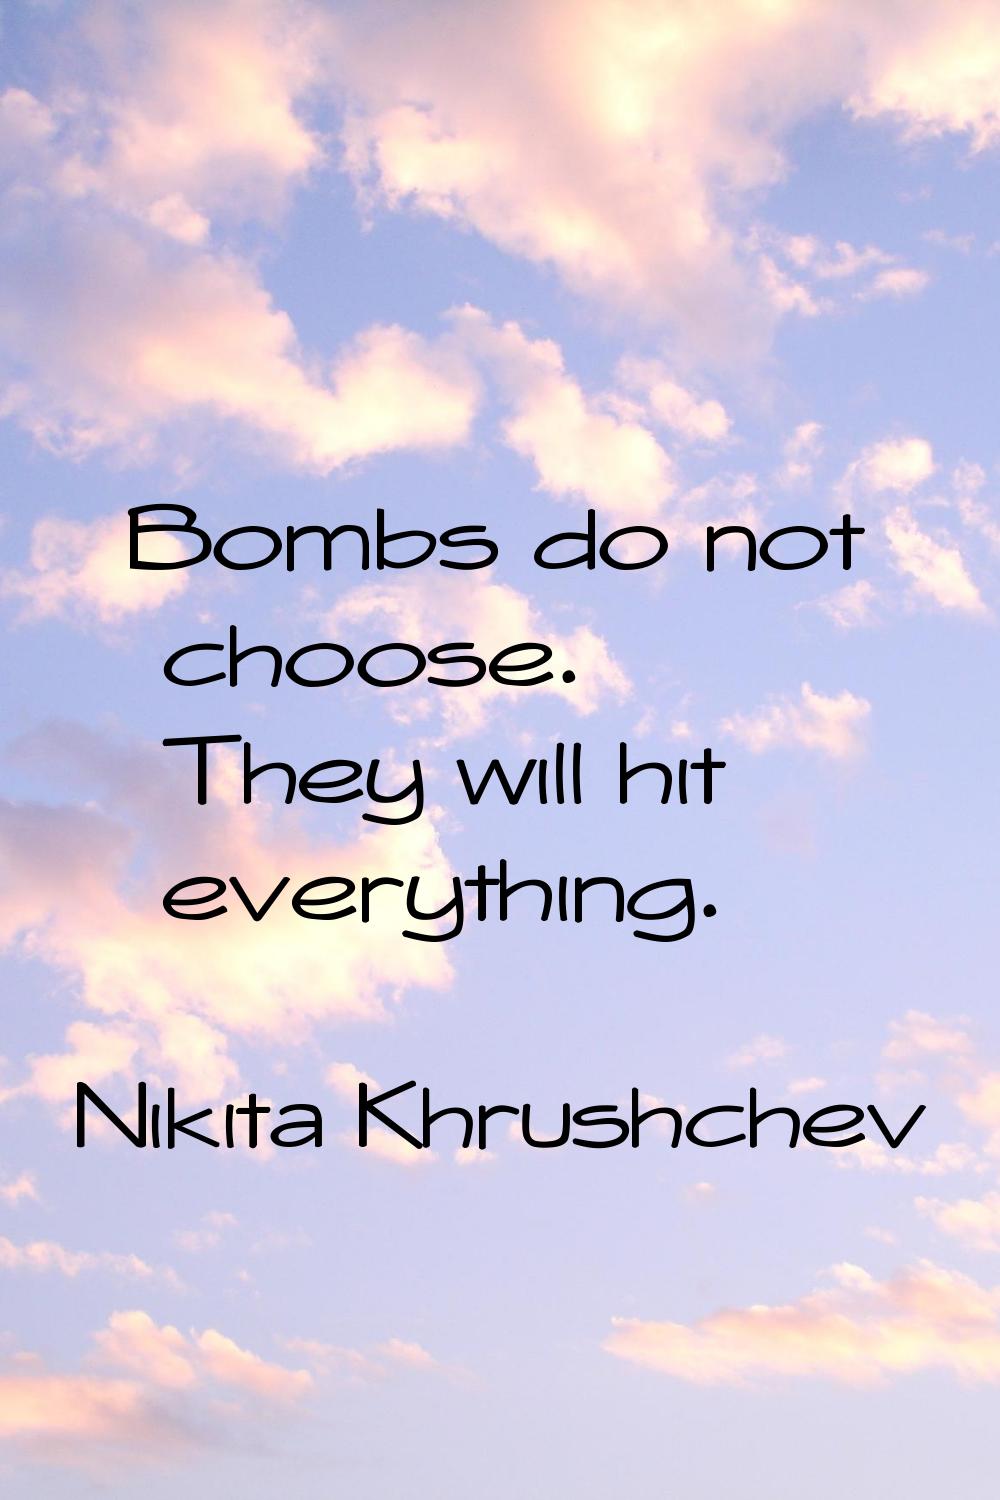 Bombs do not choose. They will hit everything.